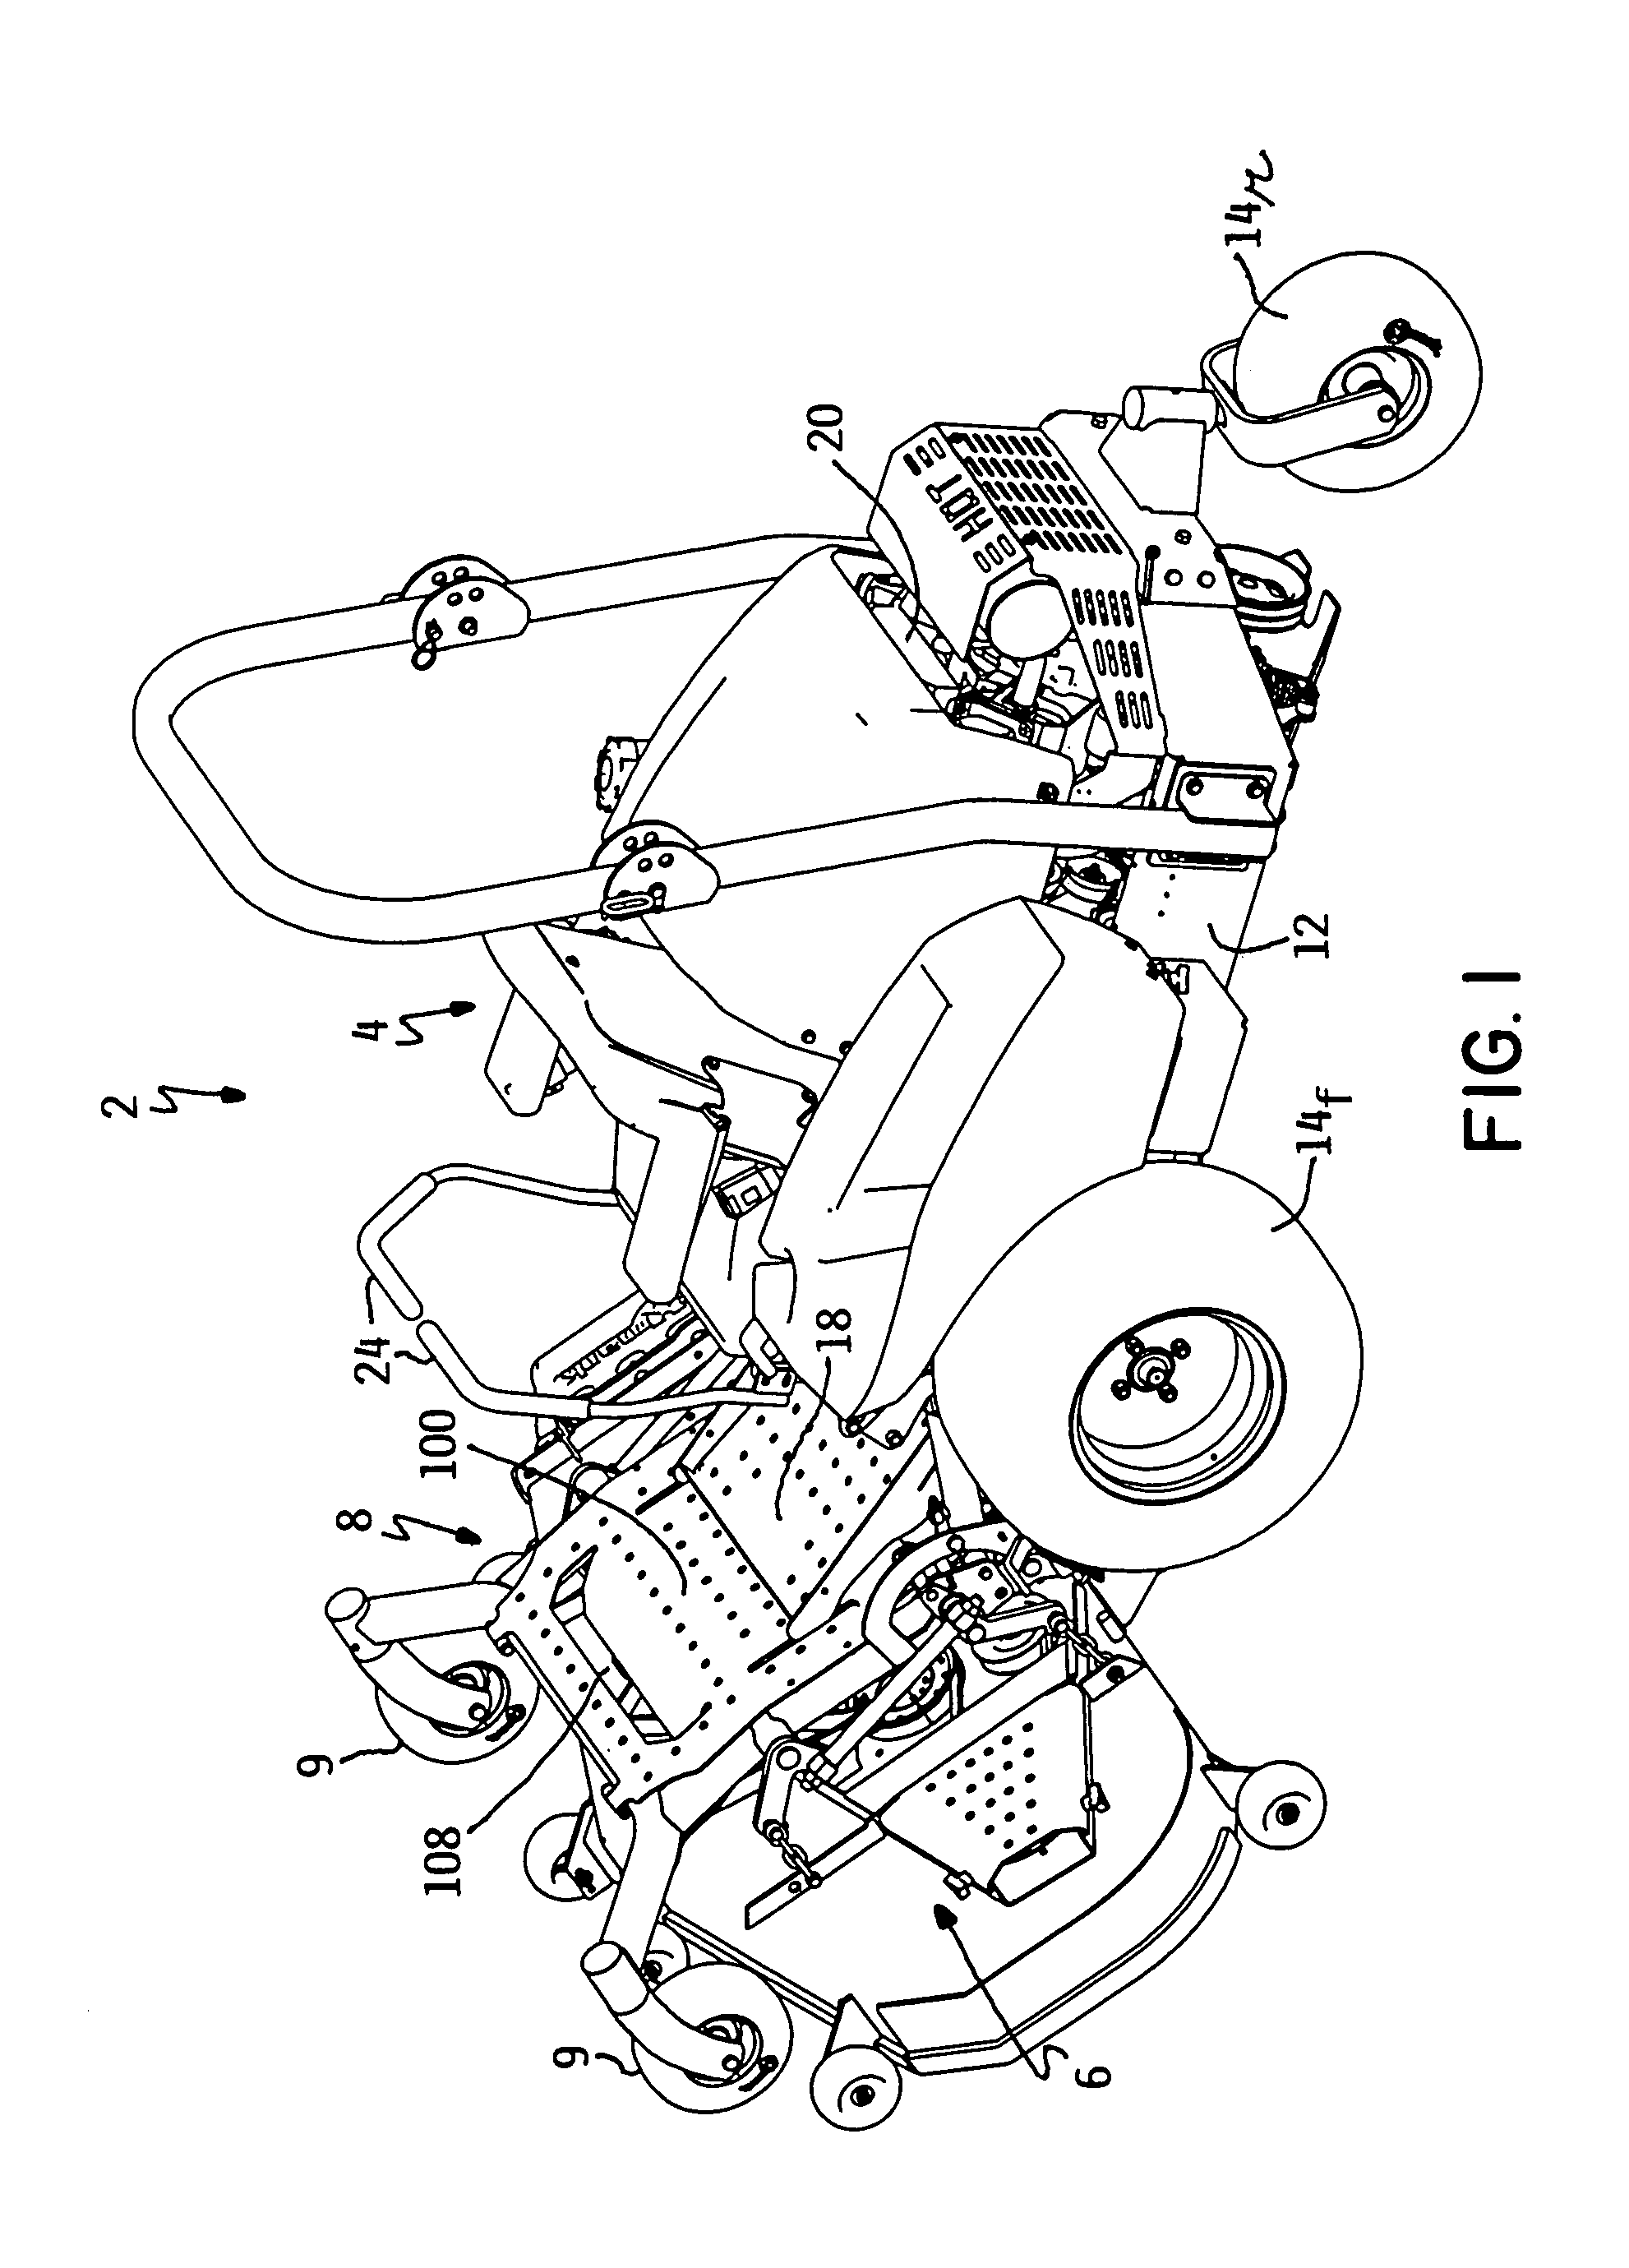 Front rotary cutting deck having folded service/storage positions